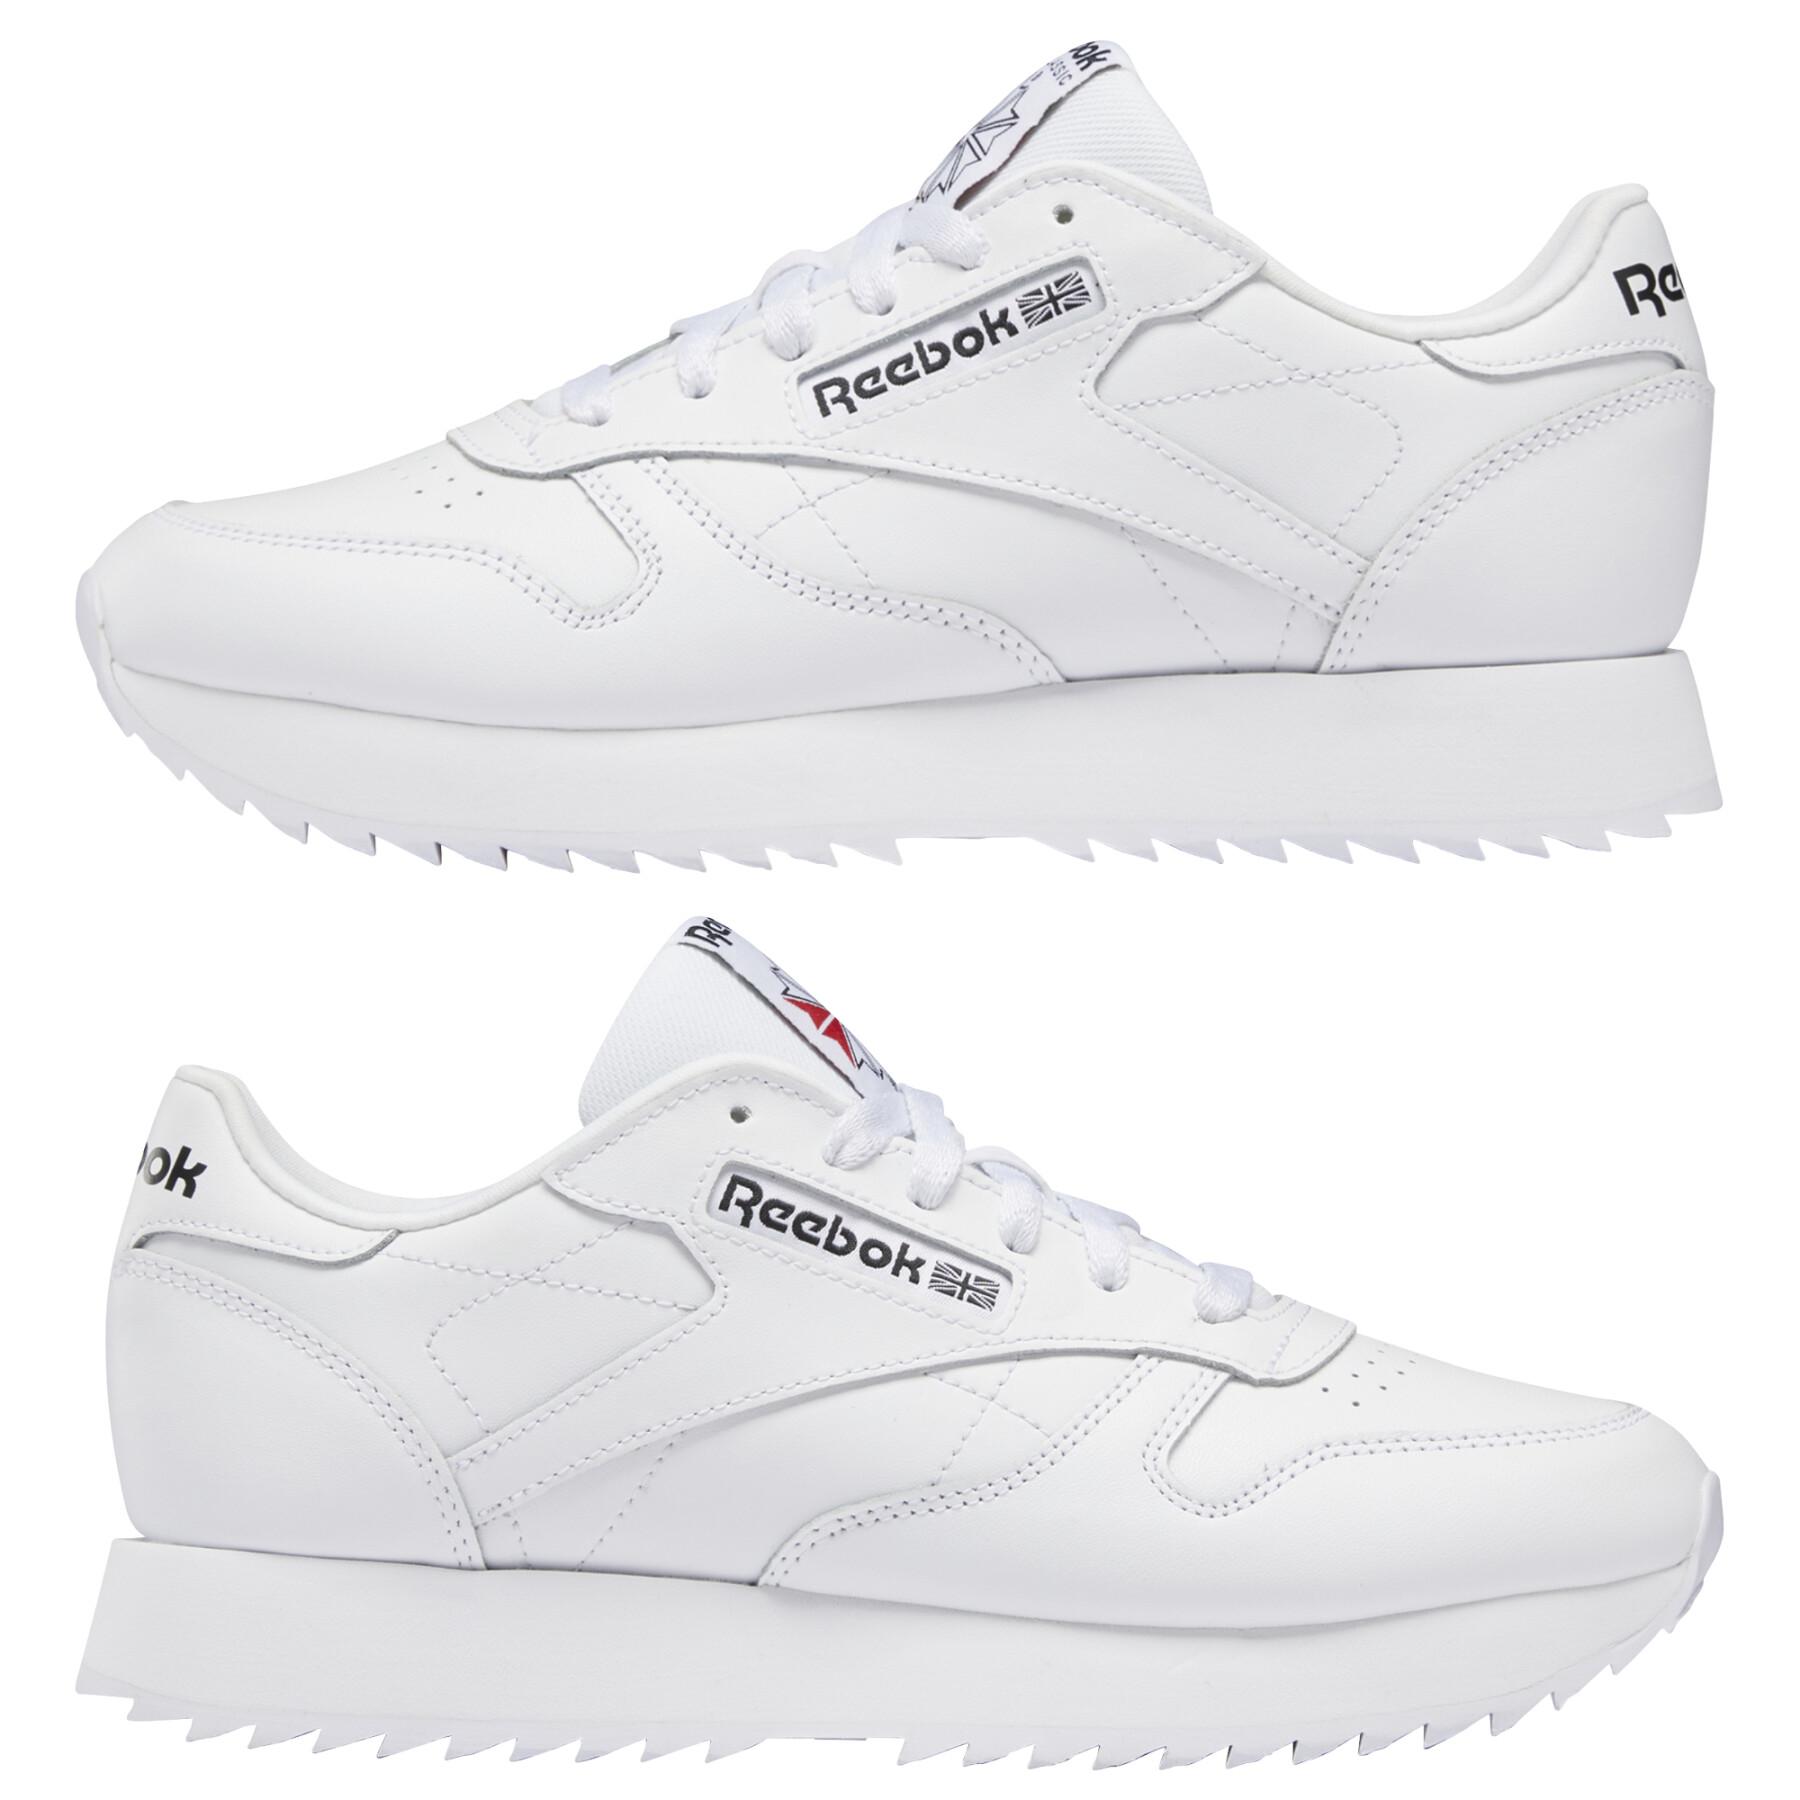 Chaussures femme Reebok Classic Leather Ripple